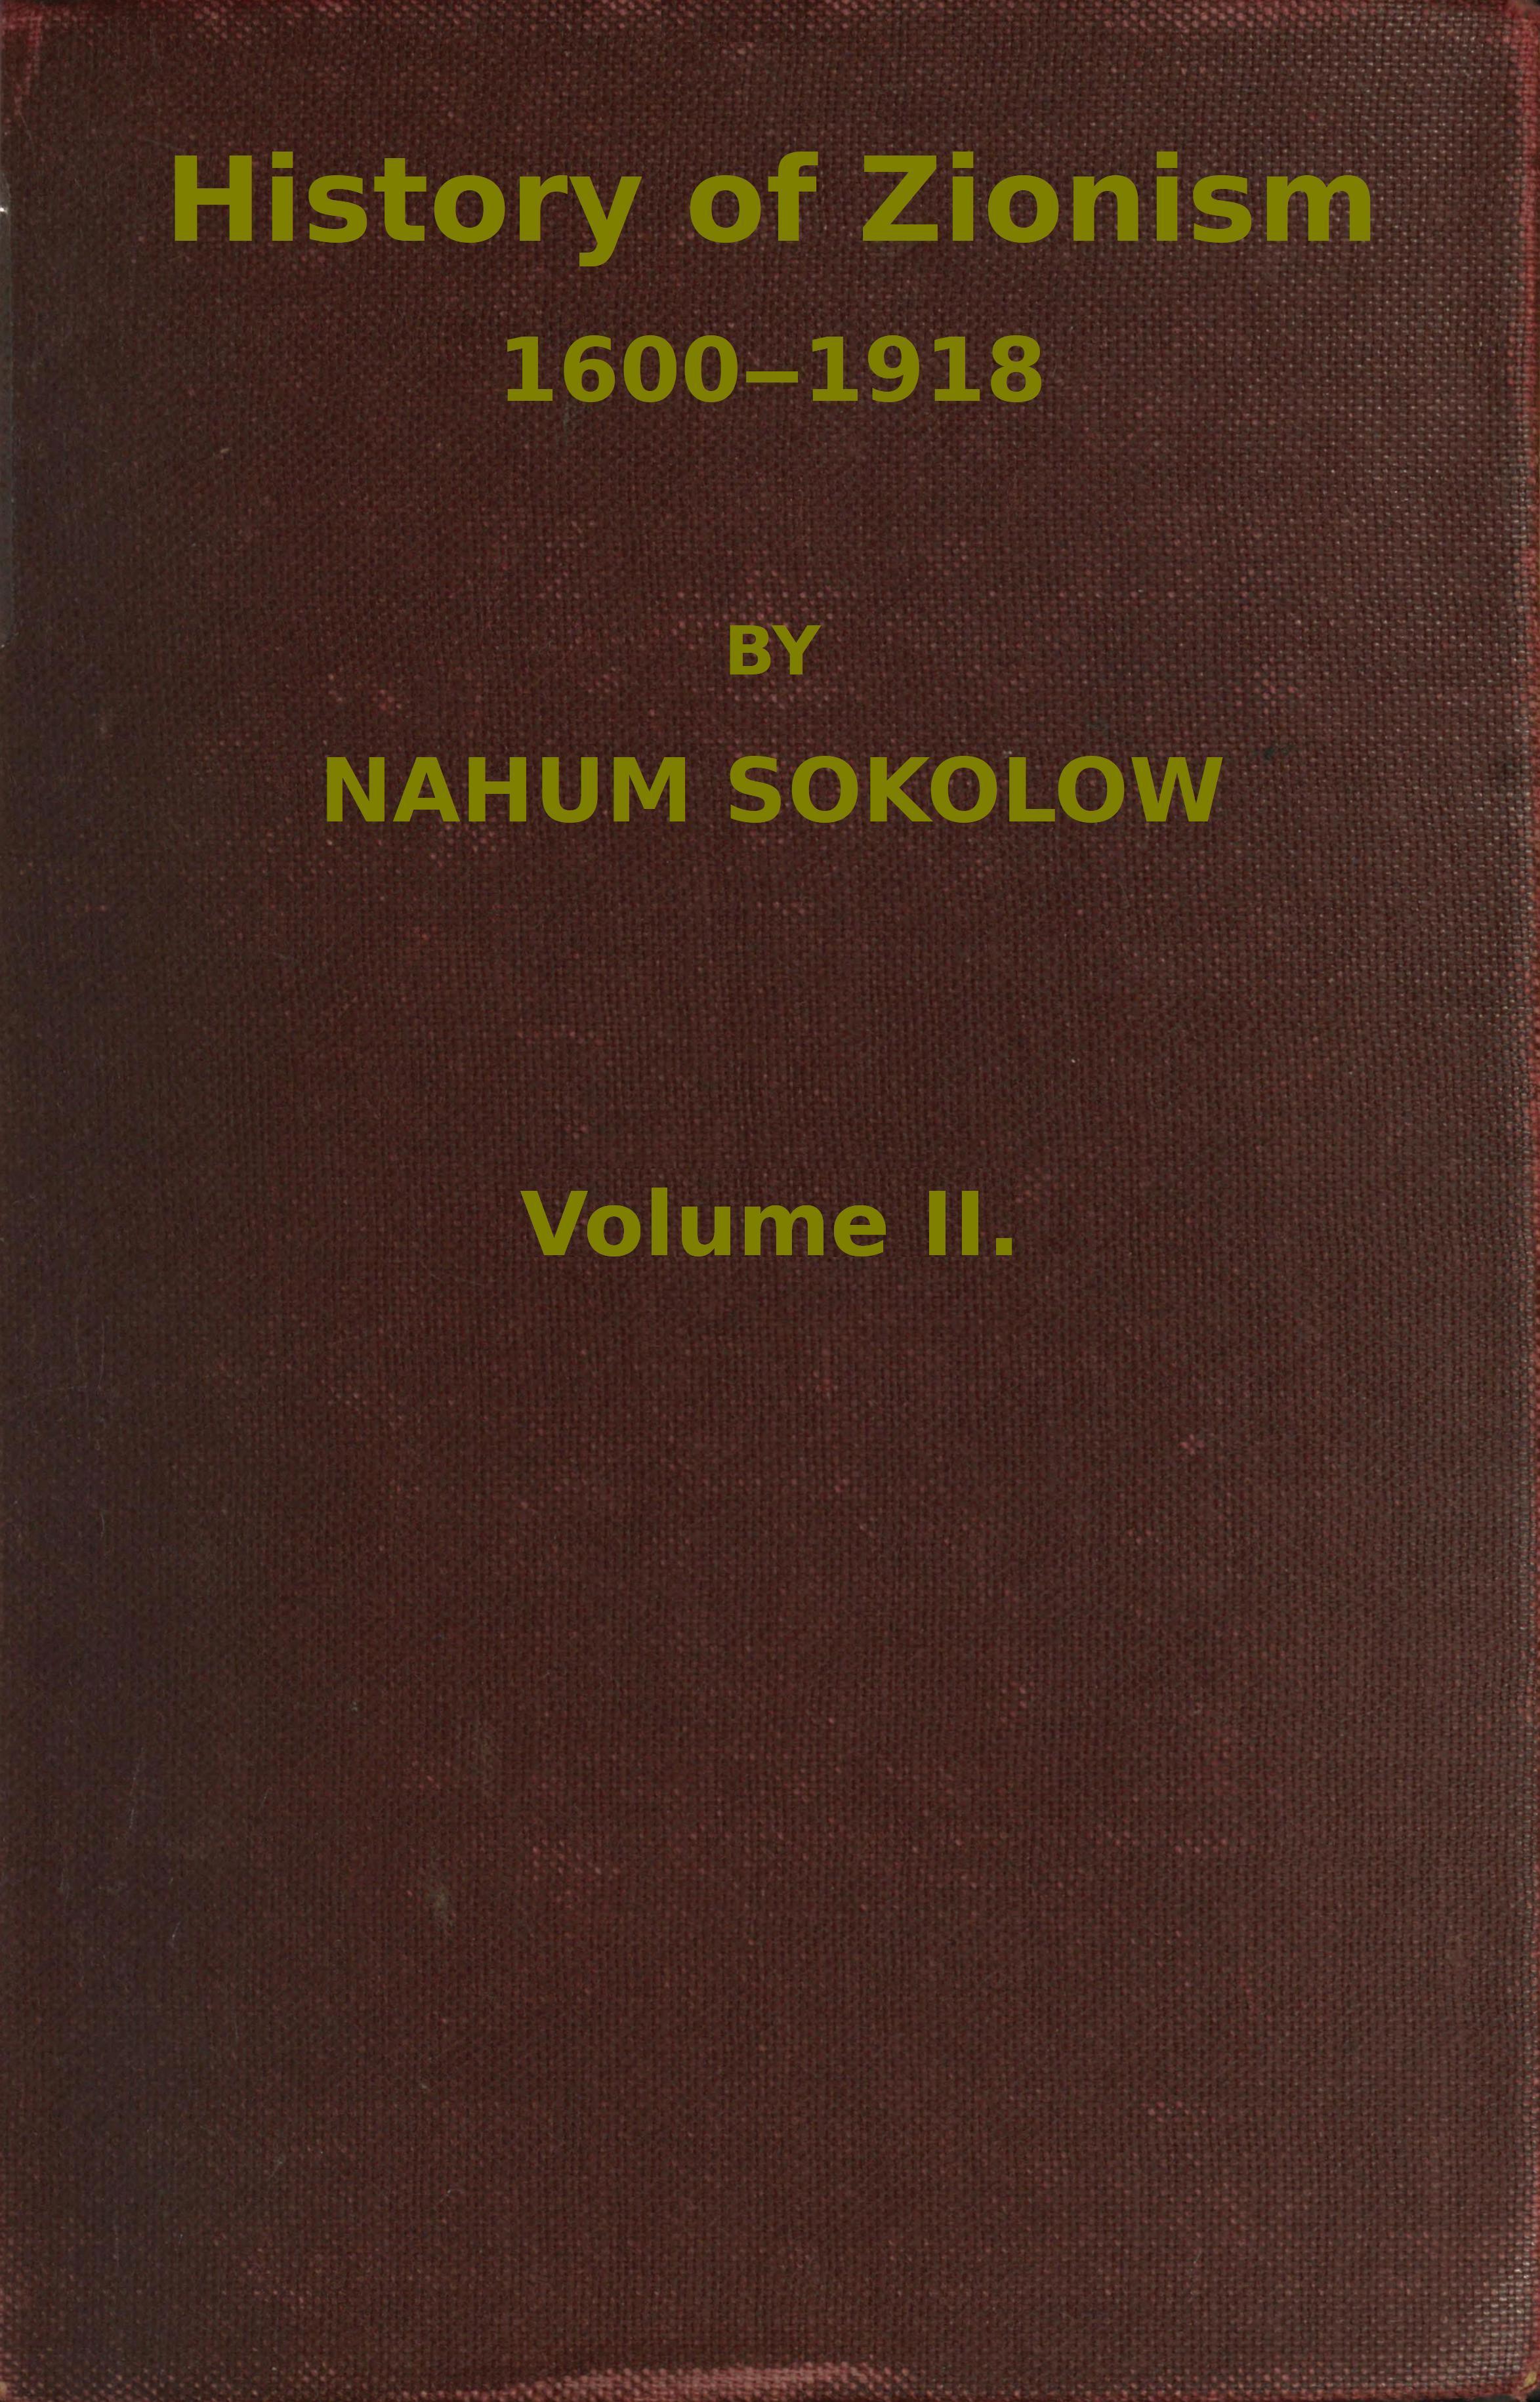 History of Zionism, by Nahum Sokolow A Project Gutenberg eBook